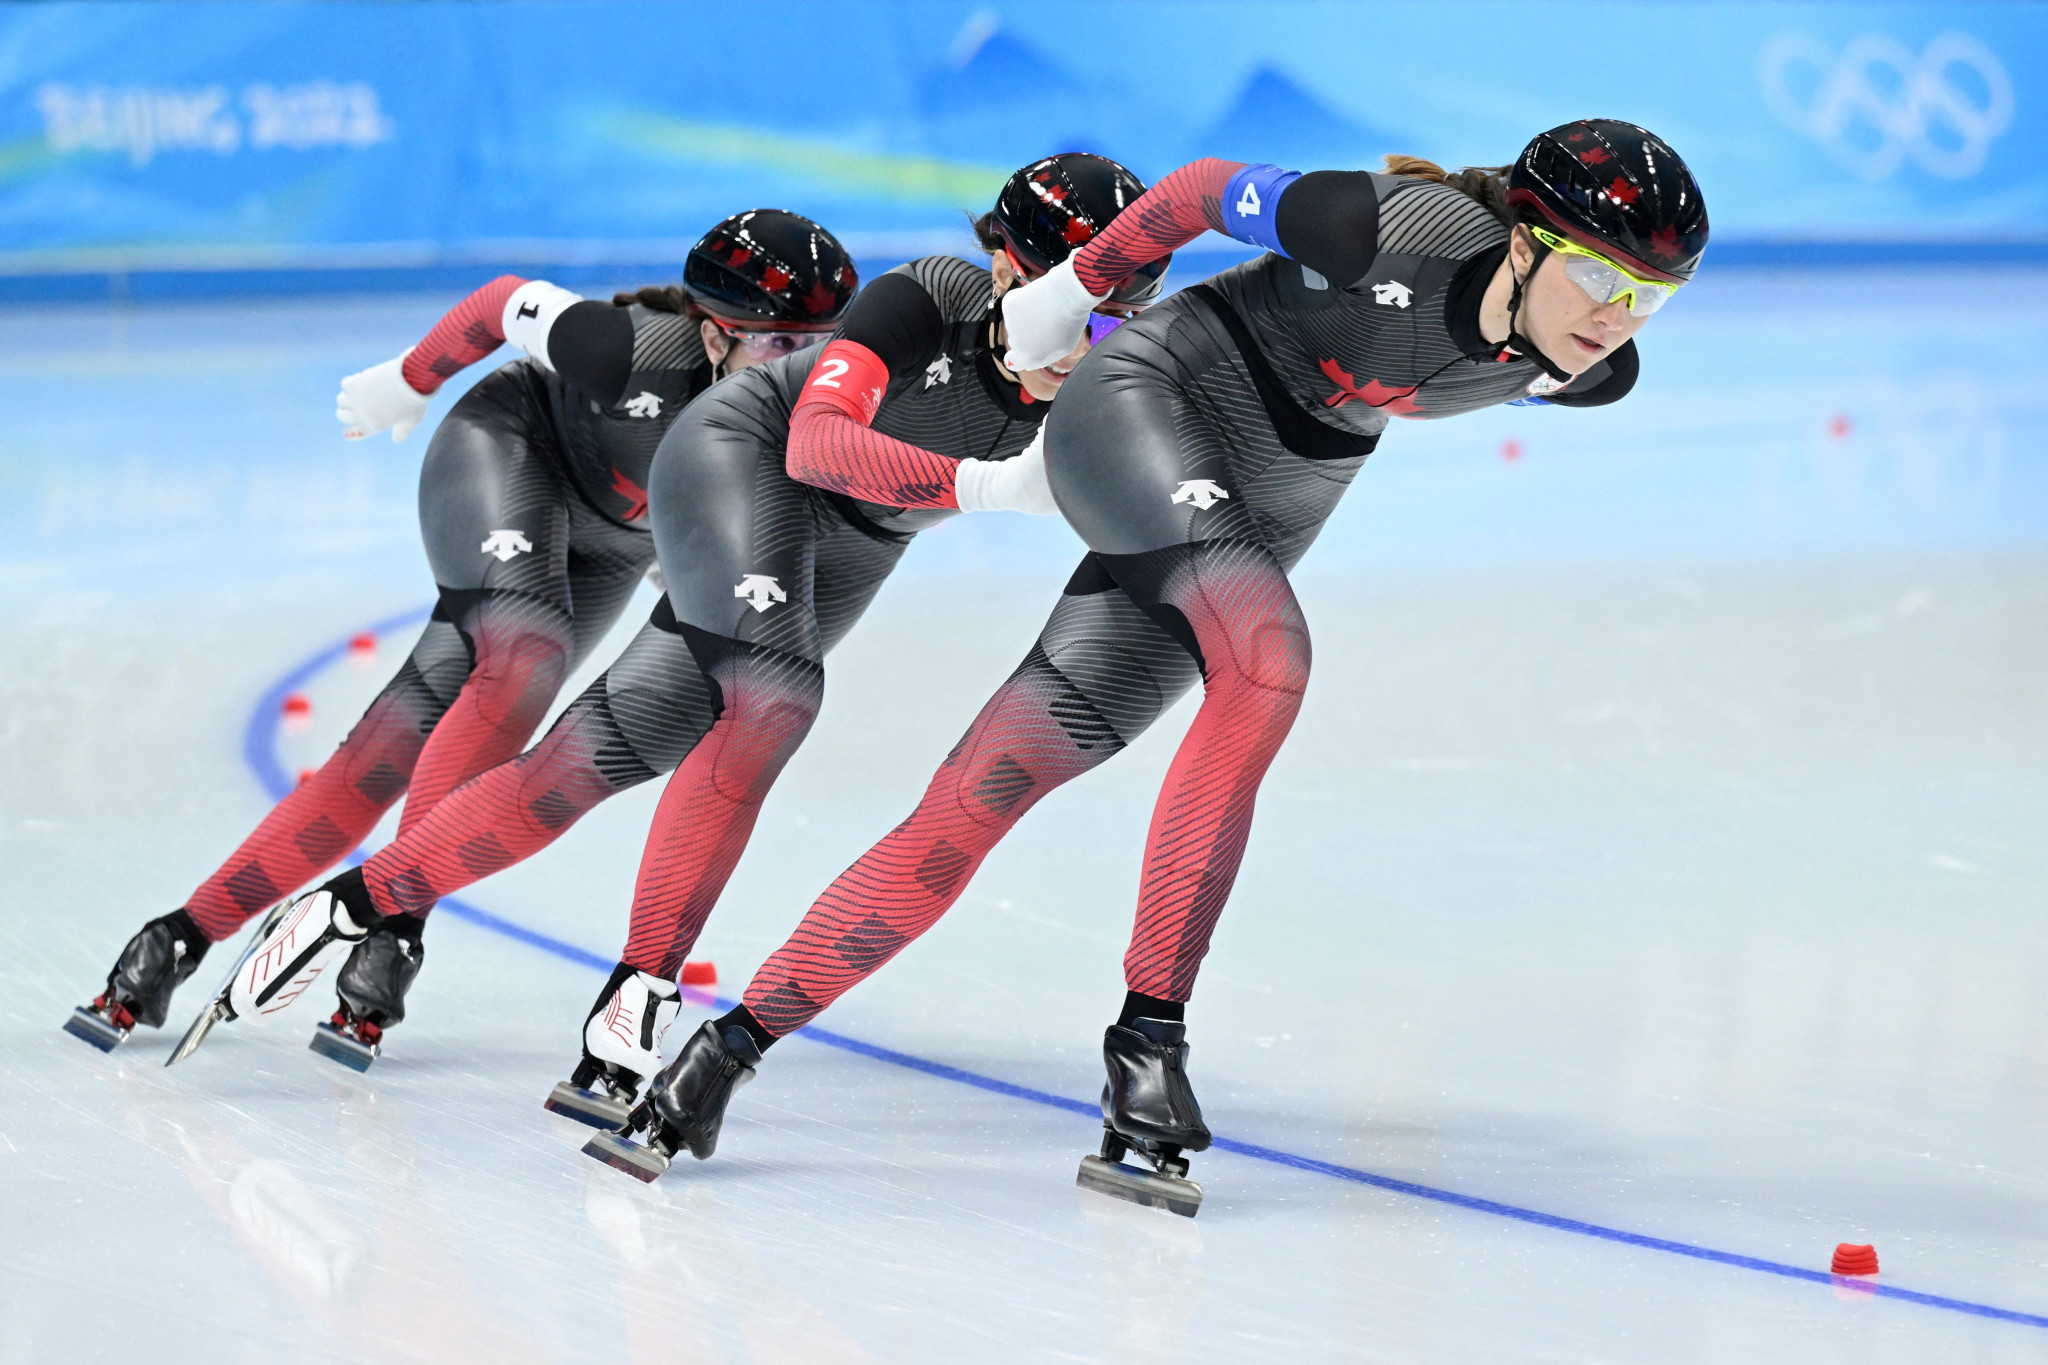 Ivanie Blondin, left, Valerie Maltais, centre, and Isabelle Weidemann, right, triumphed for Canada in the women's speed skating team pursuit ©Getty Images